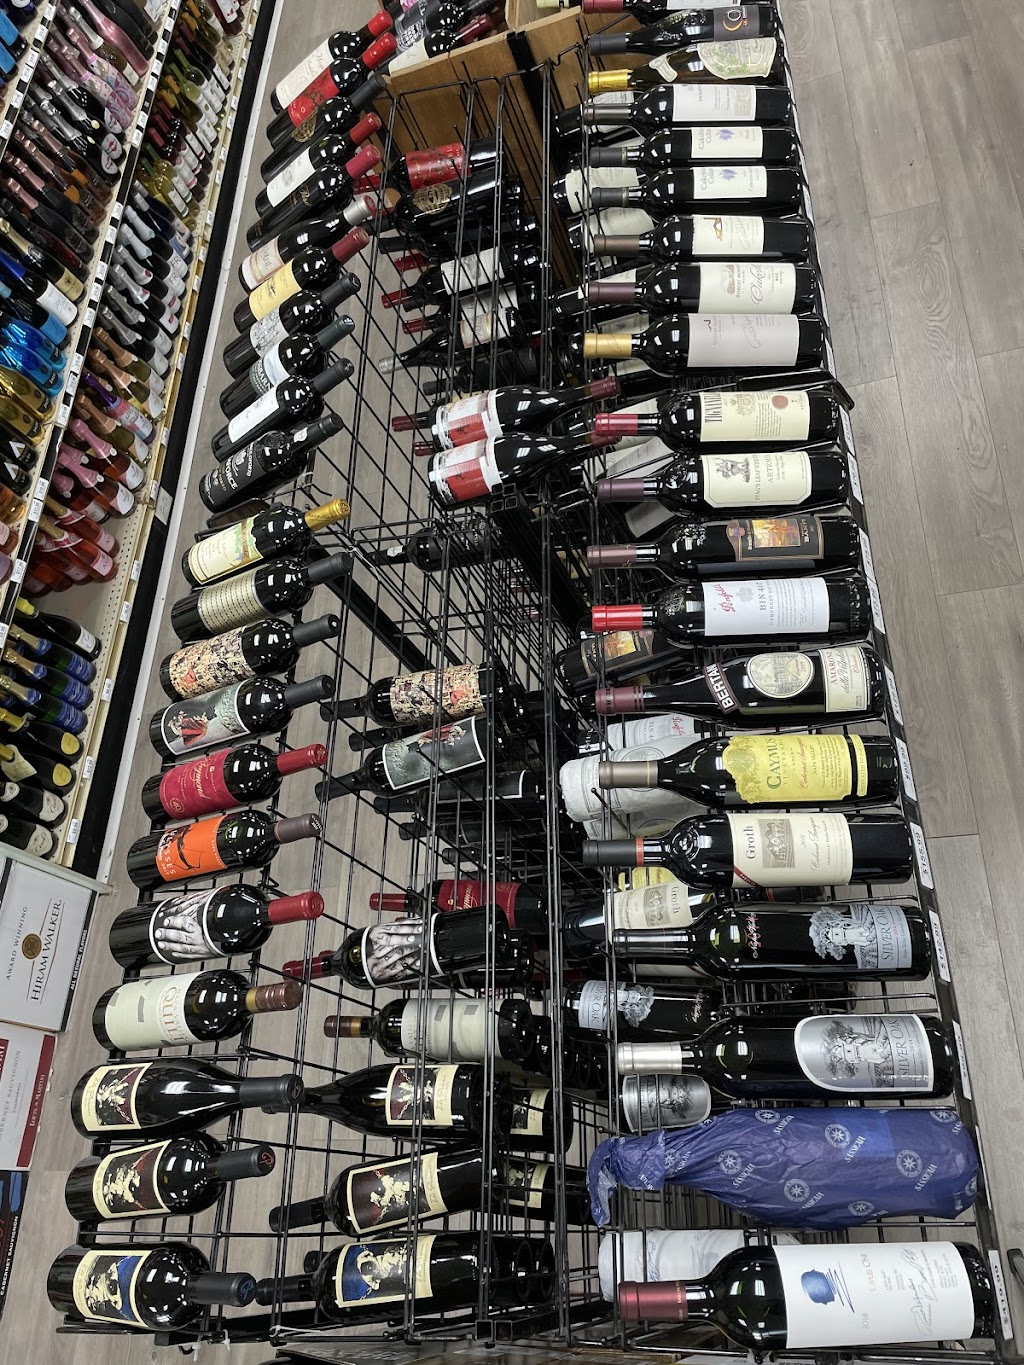 Wine Mart Fine Wine & Spirits | 757 Old Country Rd, Riverhead, NY 11901 | Phone: (631) 740-9888